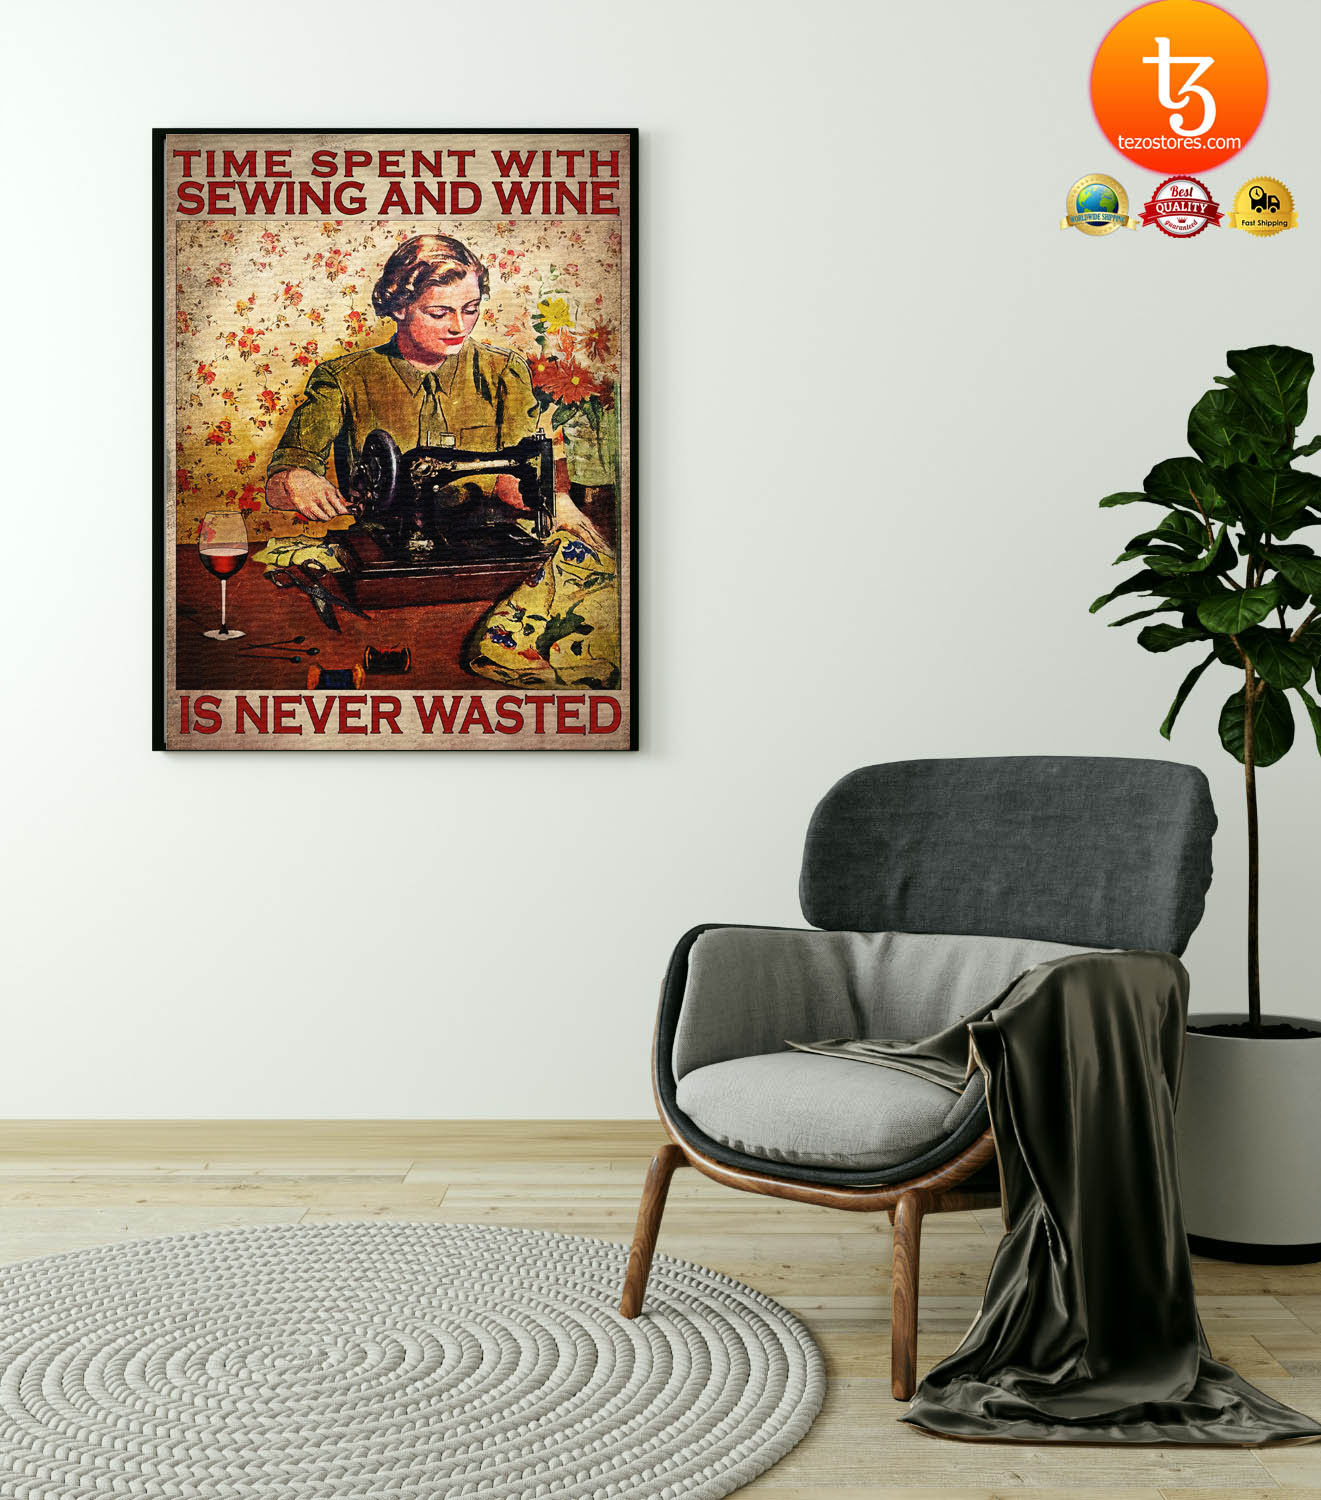 Time spent with sewing and wine is never wasted poster1